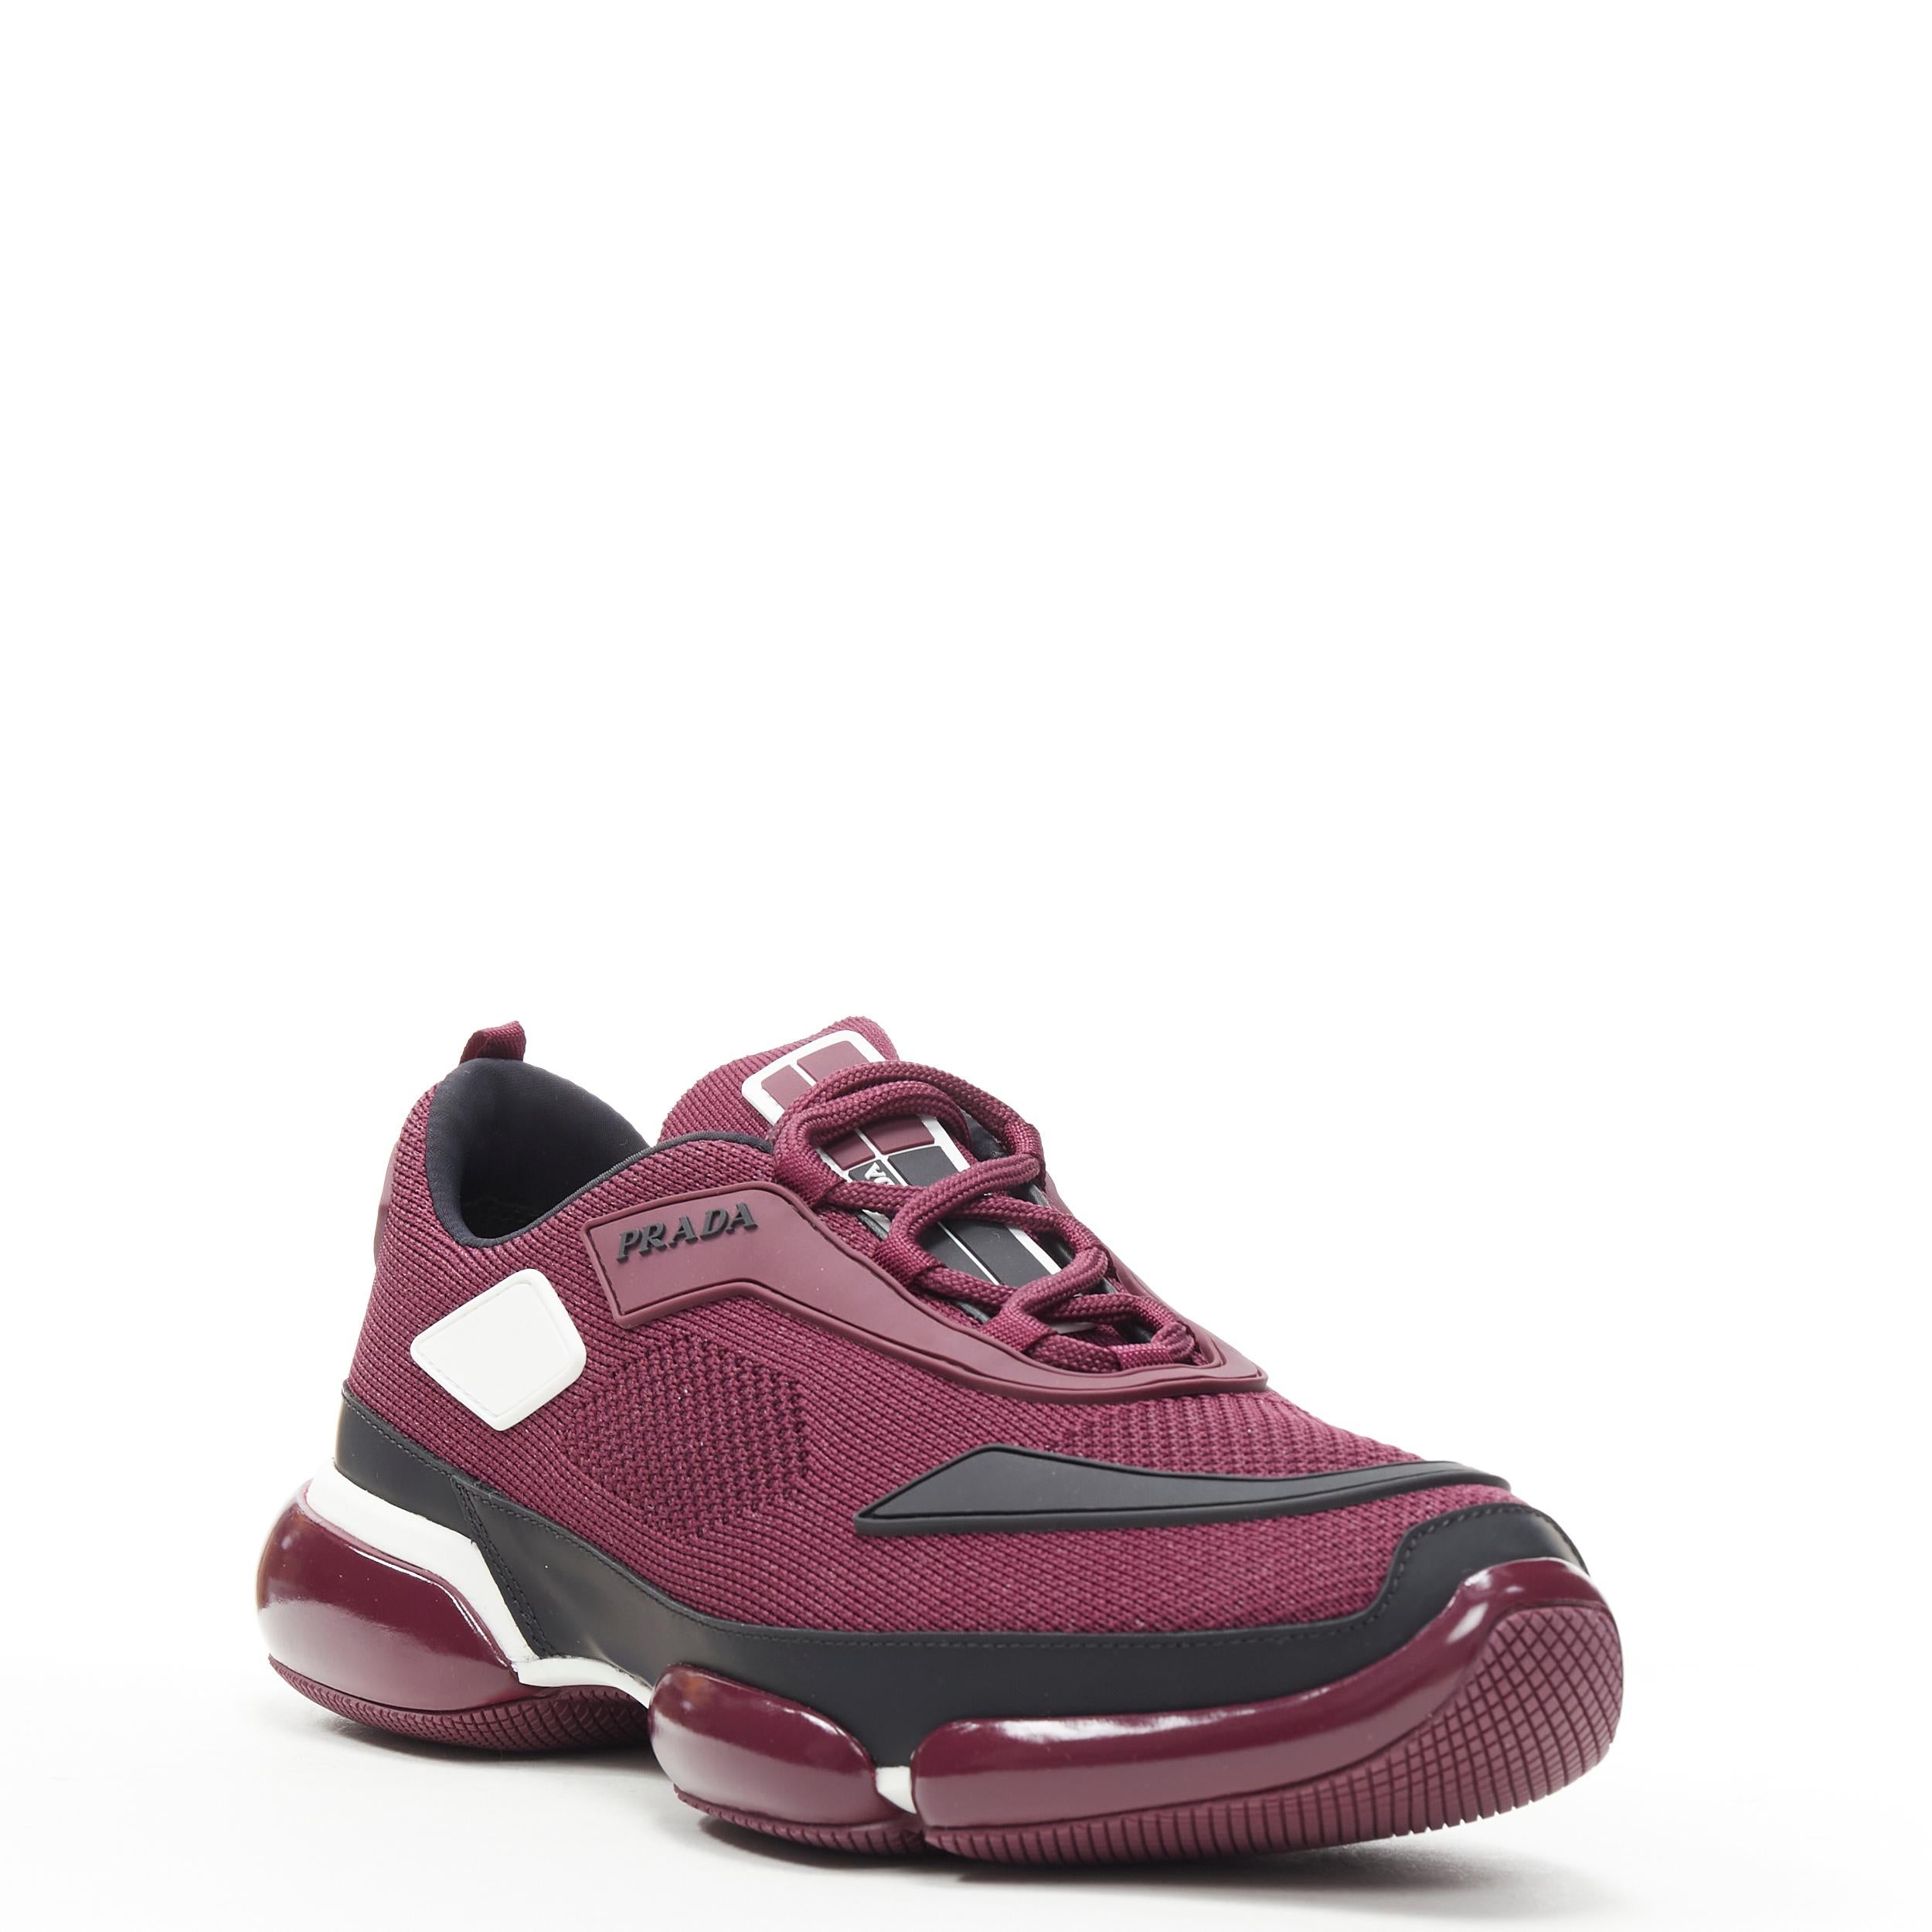 new PRADA 2018 Cloudbust burgundy red rubber logo low top sneaker UK7 US8 EU41
Reference: TGAS/B00911
Brand: Prada
Designer: Miuccia Prada
Model: Cloudbust Burgundy
Collection: 2018
Material: Fabric, Rubber
Color: Burgundy
Pattern: Solid
Closure: